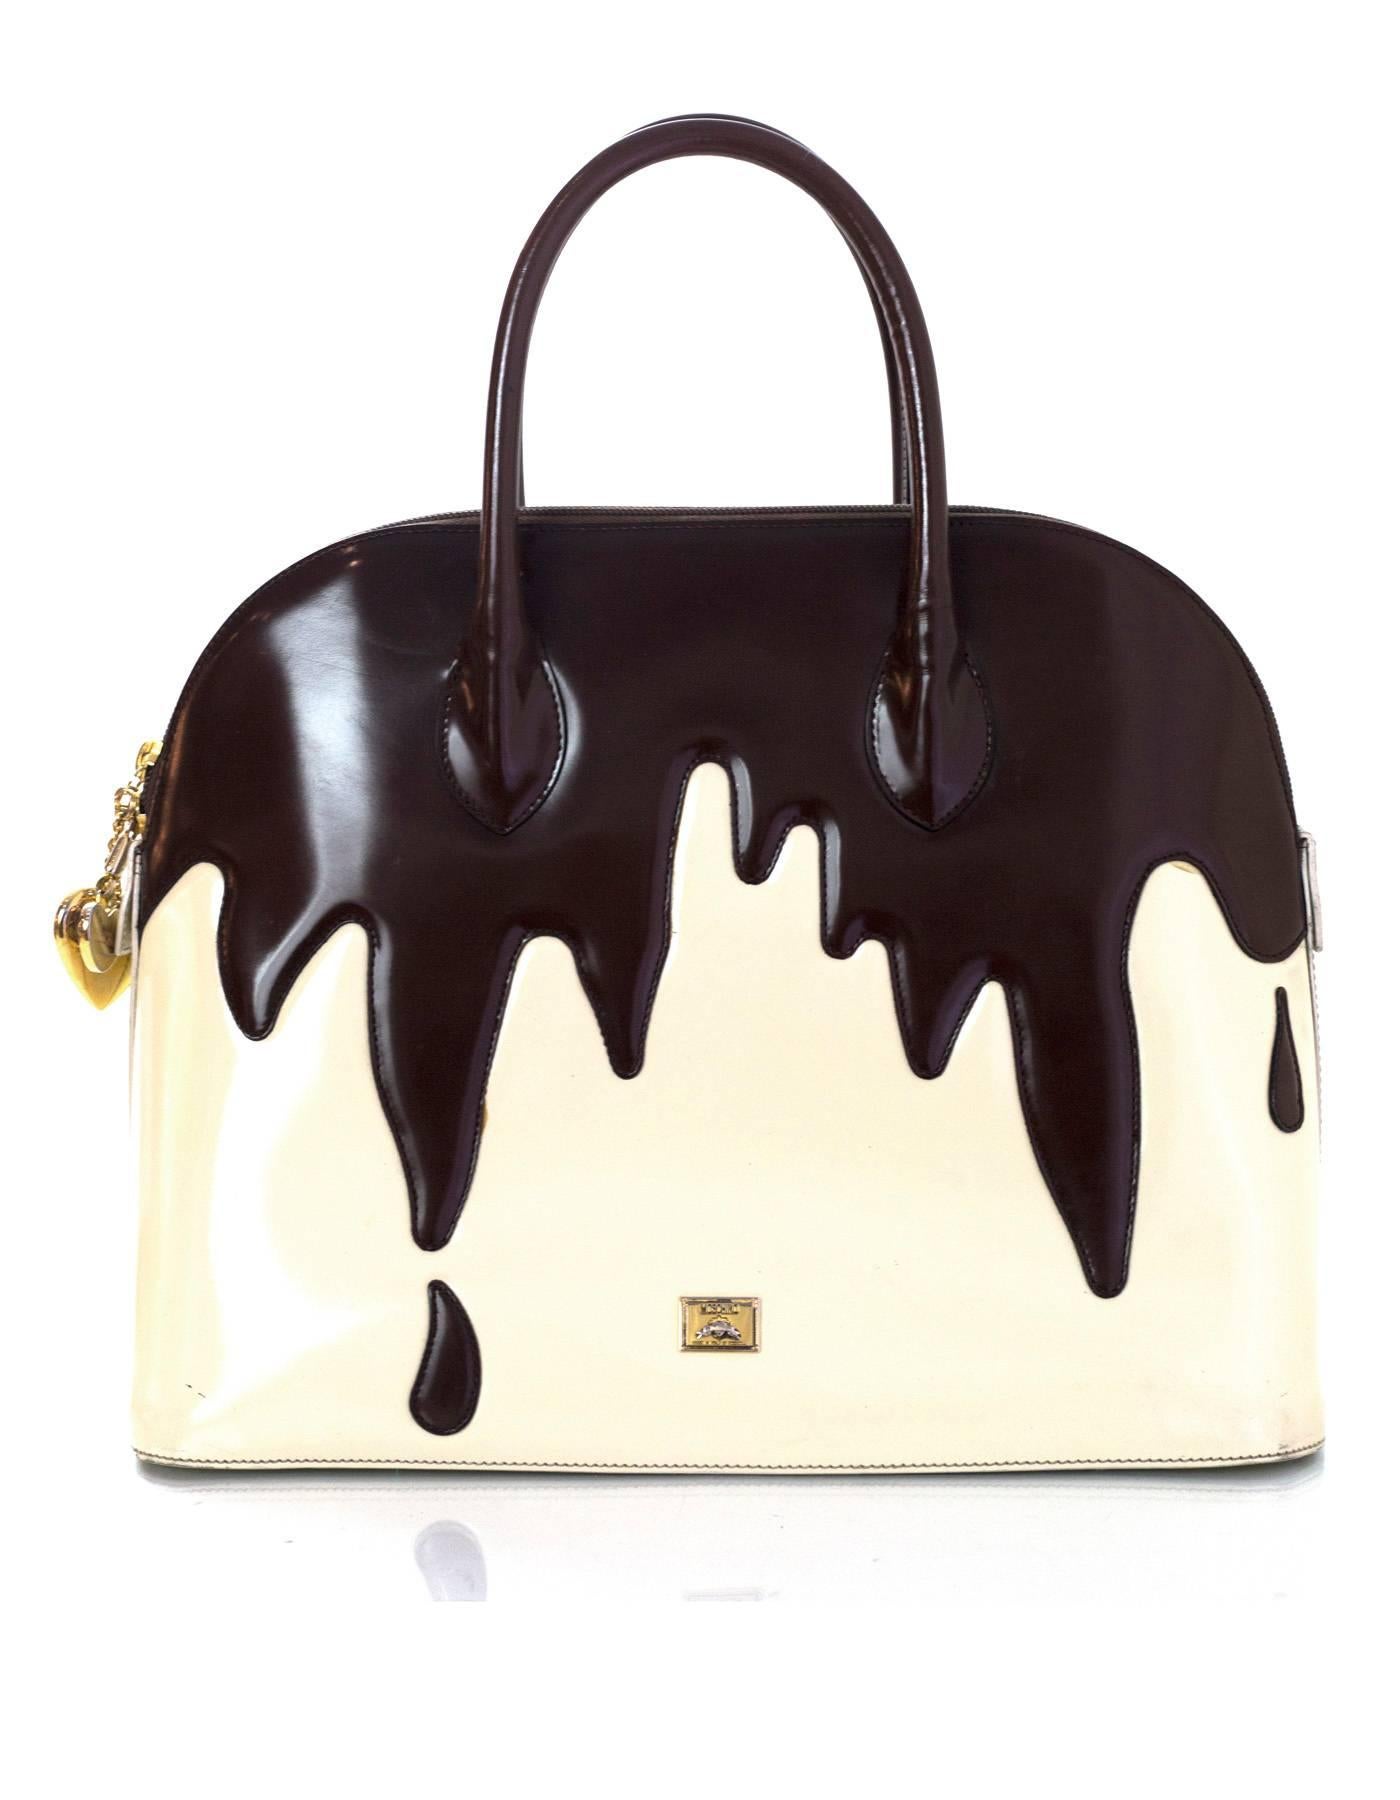 Moschino Dripping Chocolate Handle Bag 
Features optional strap and heart charm zipper pull

Made In: Italy
Color: Brown, ivory
Interior Lining: Black printed textile
Hardware: Goldtone
Materials: Glazed leather, metal
Closure/Opening: Double zip